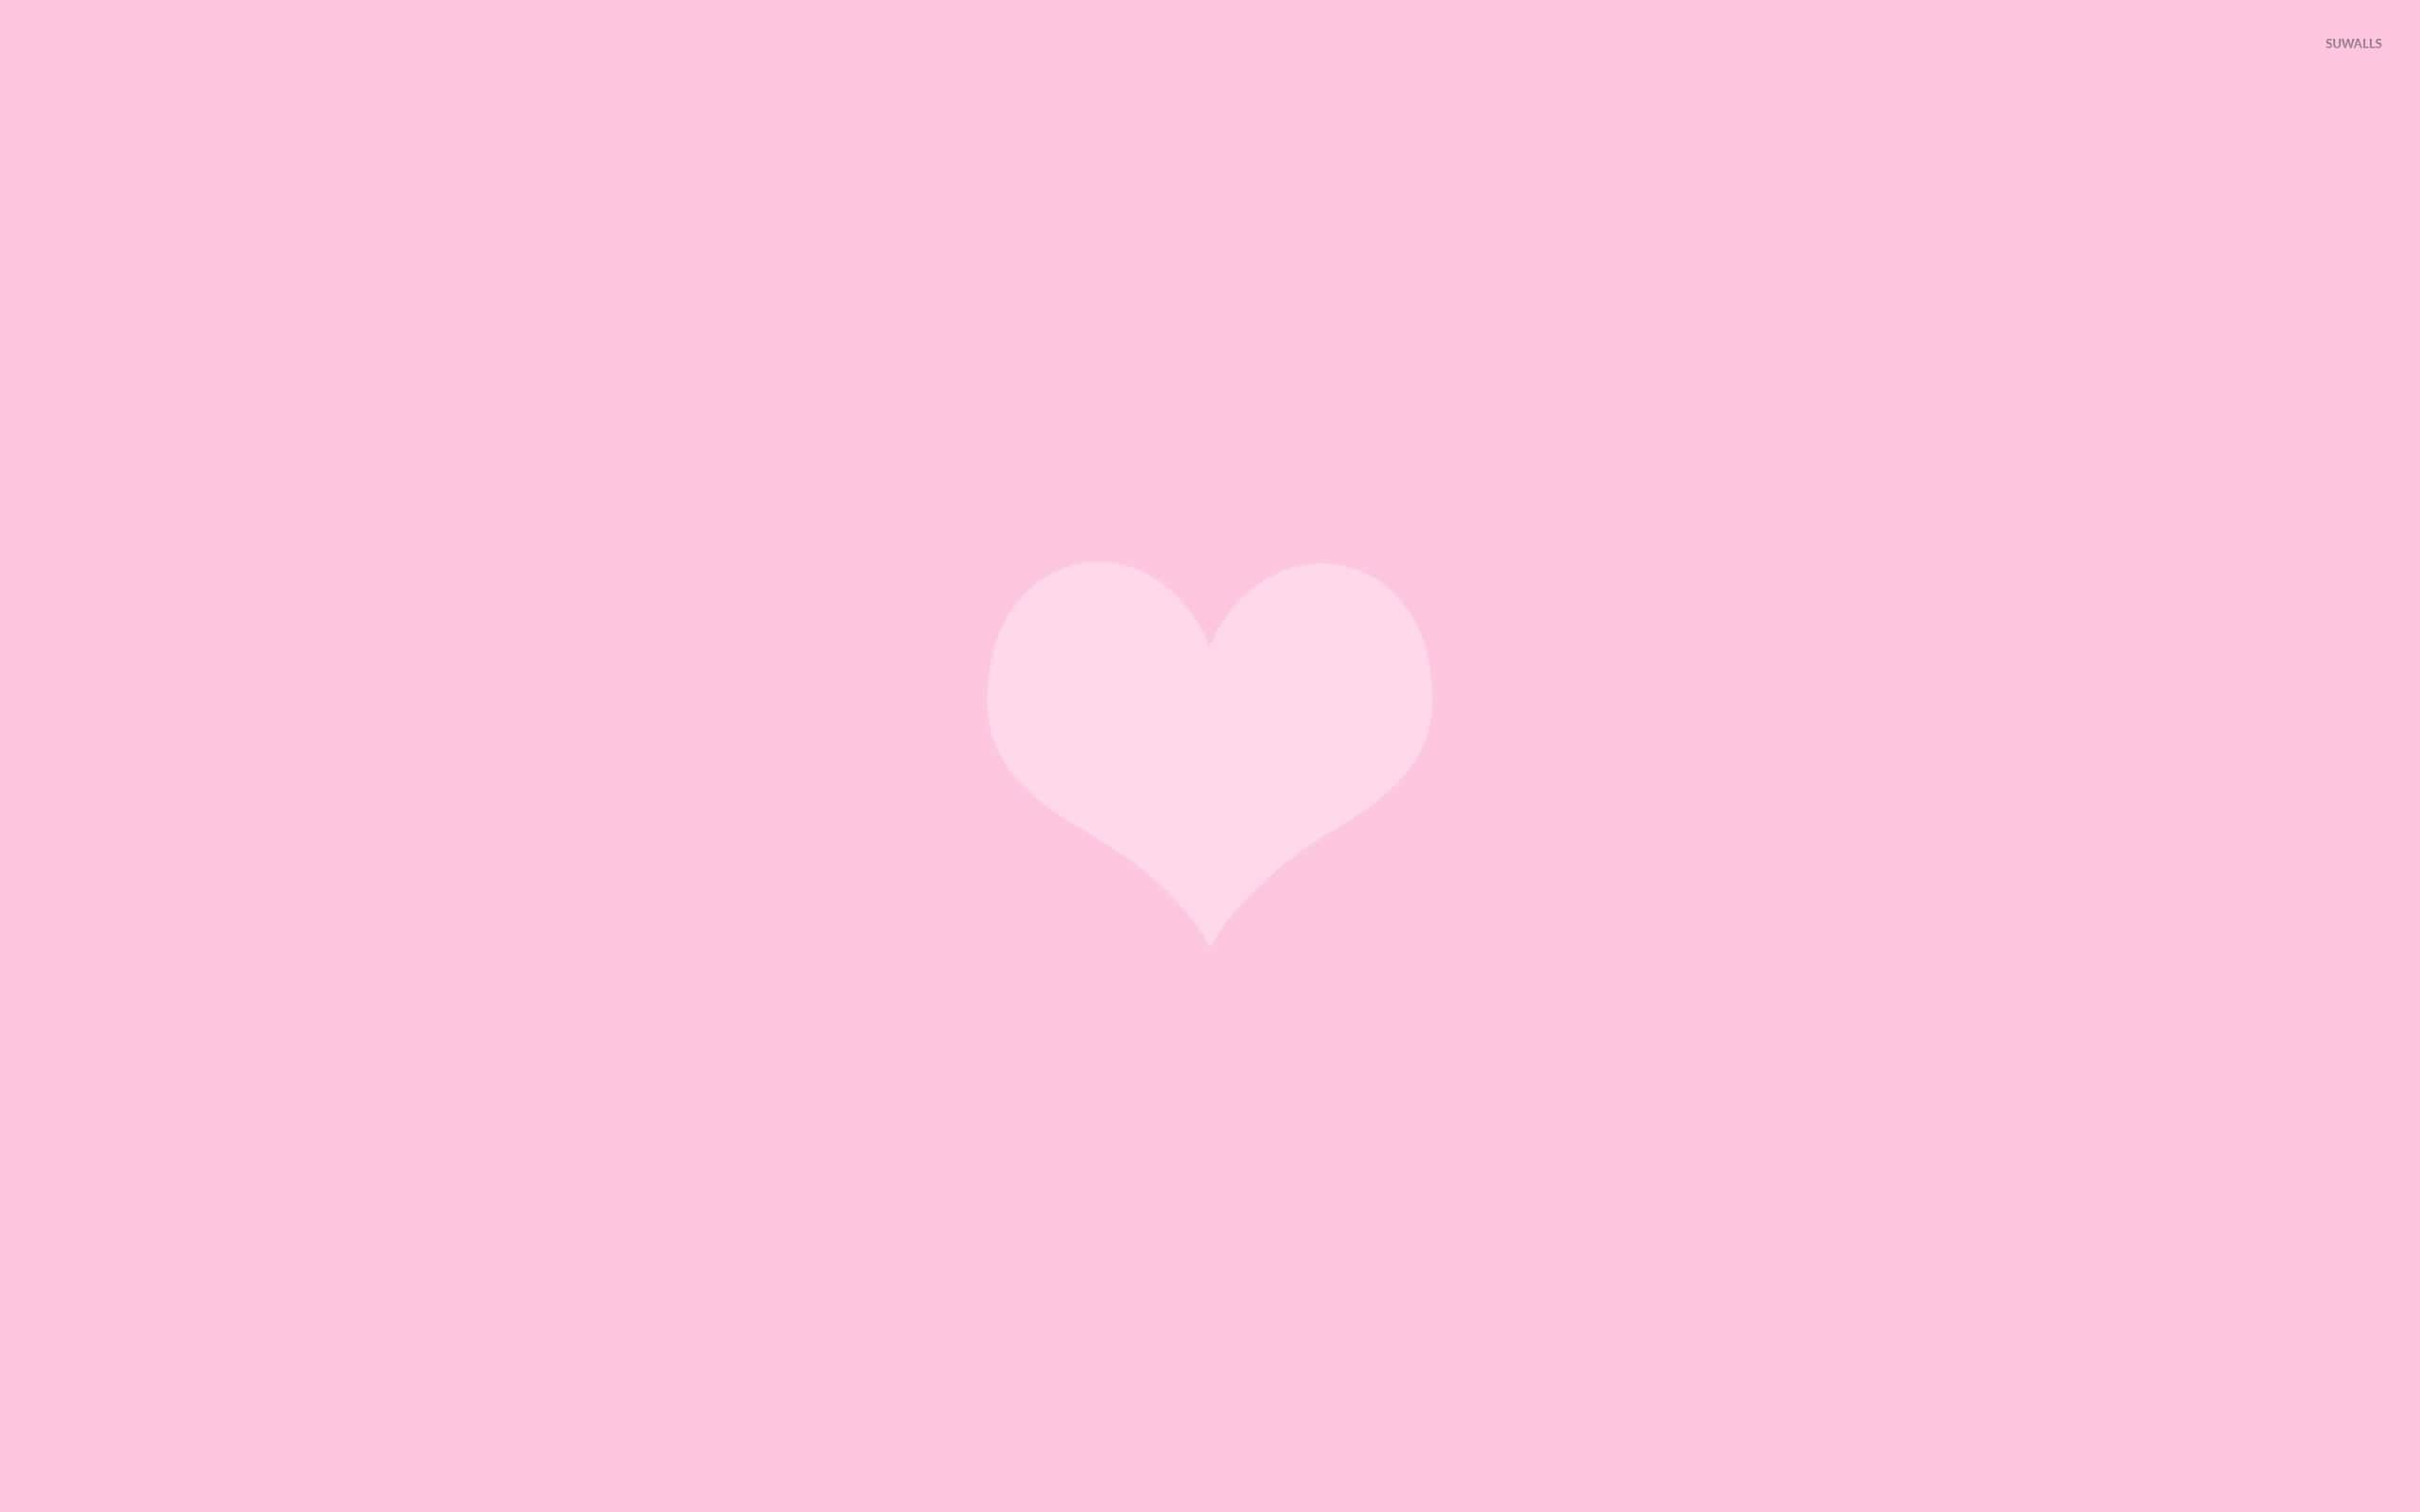 Heart on a pink background wallpaper - Valentine's Day wallpapers - #23330 - Pink heart, heart